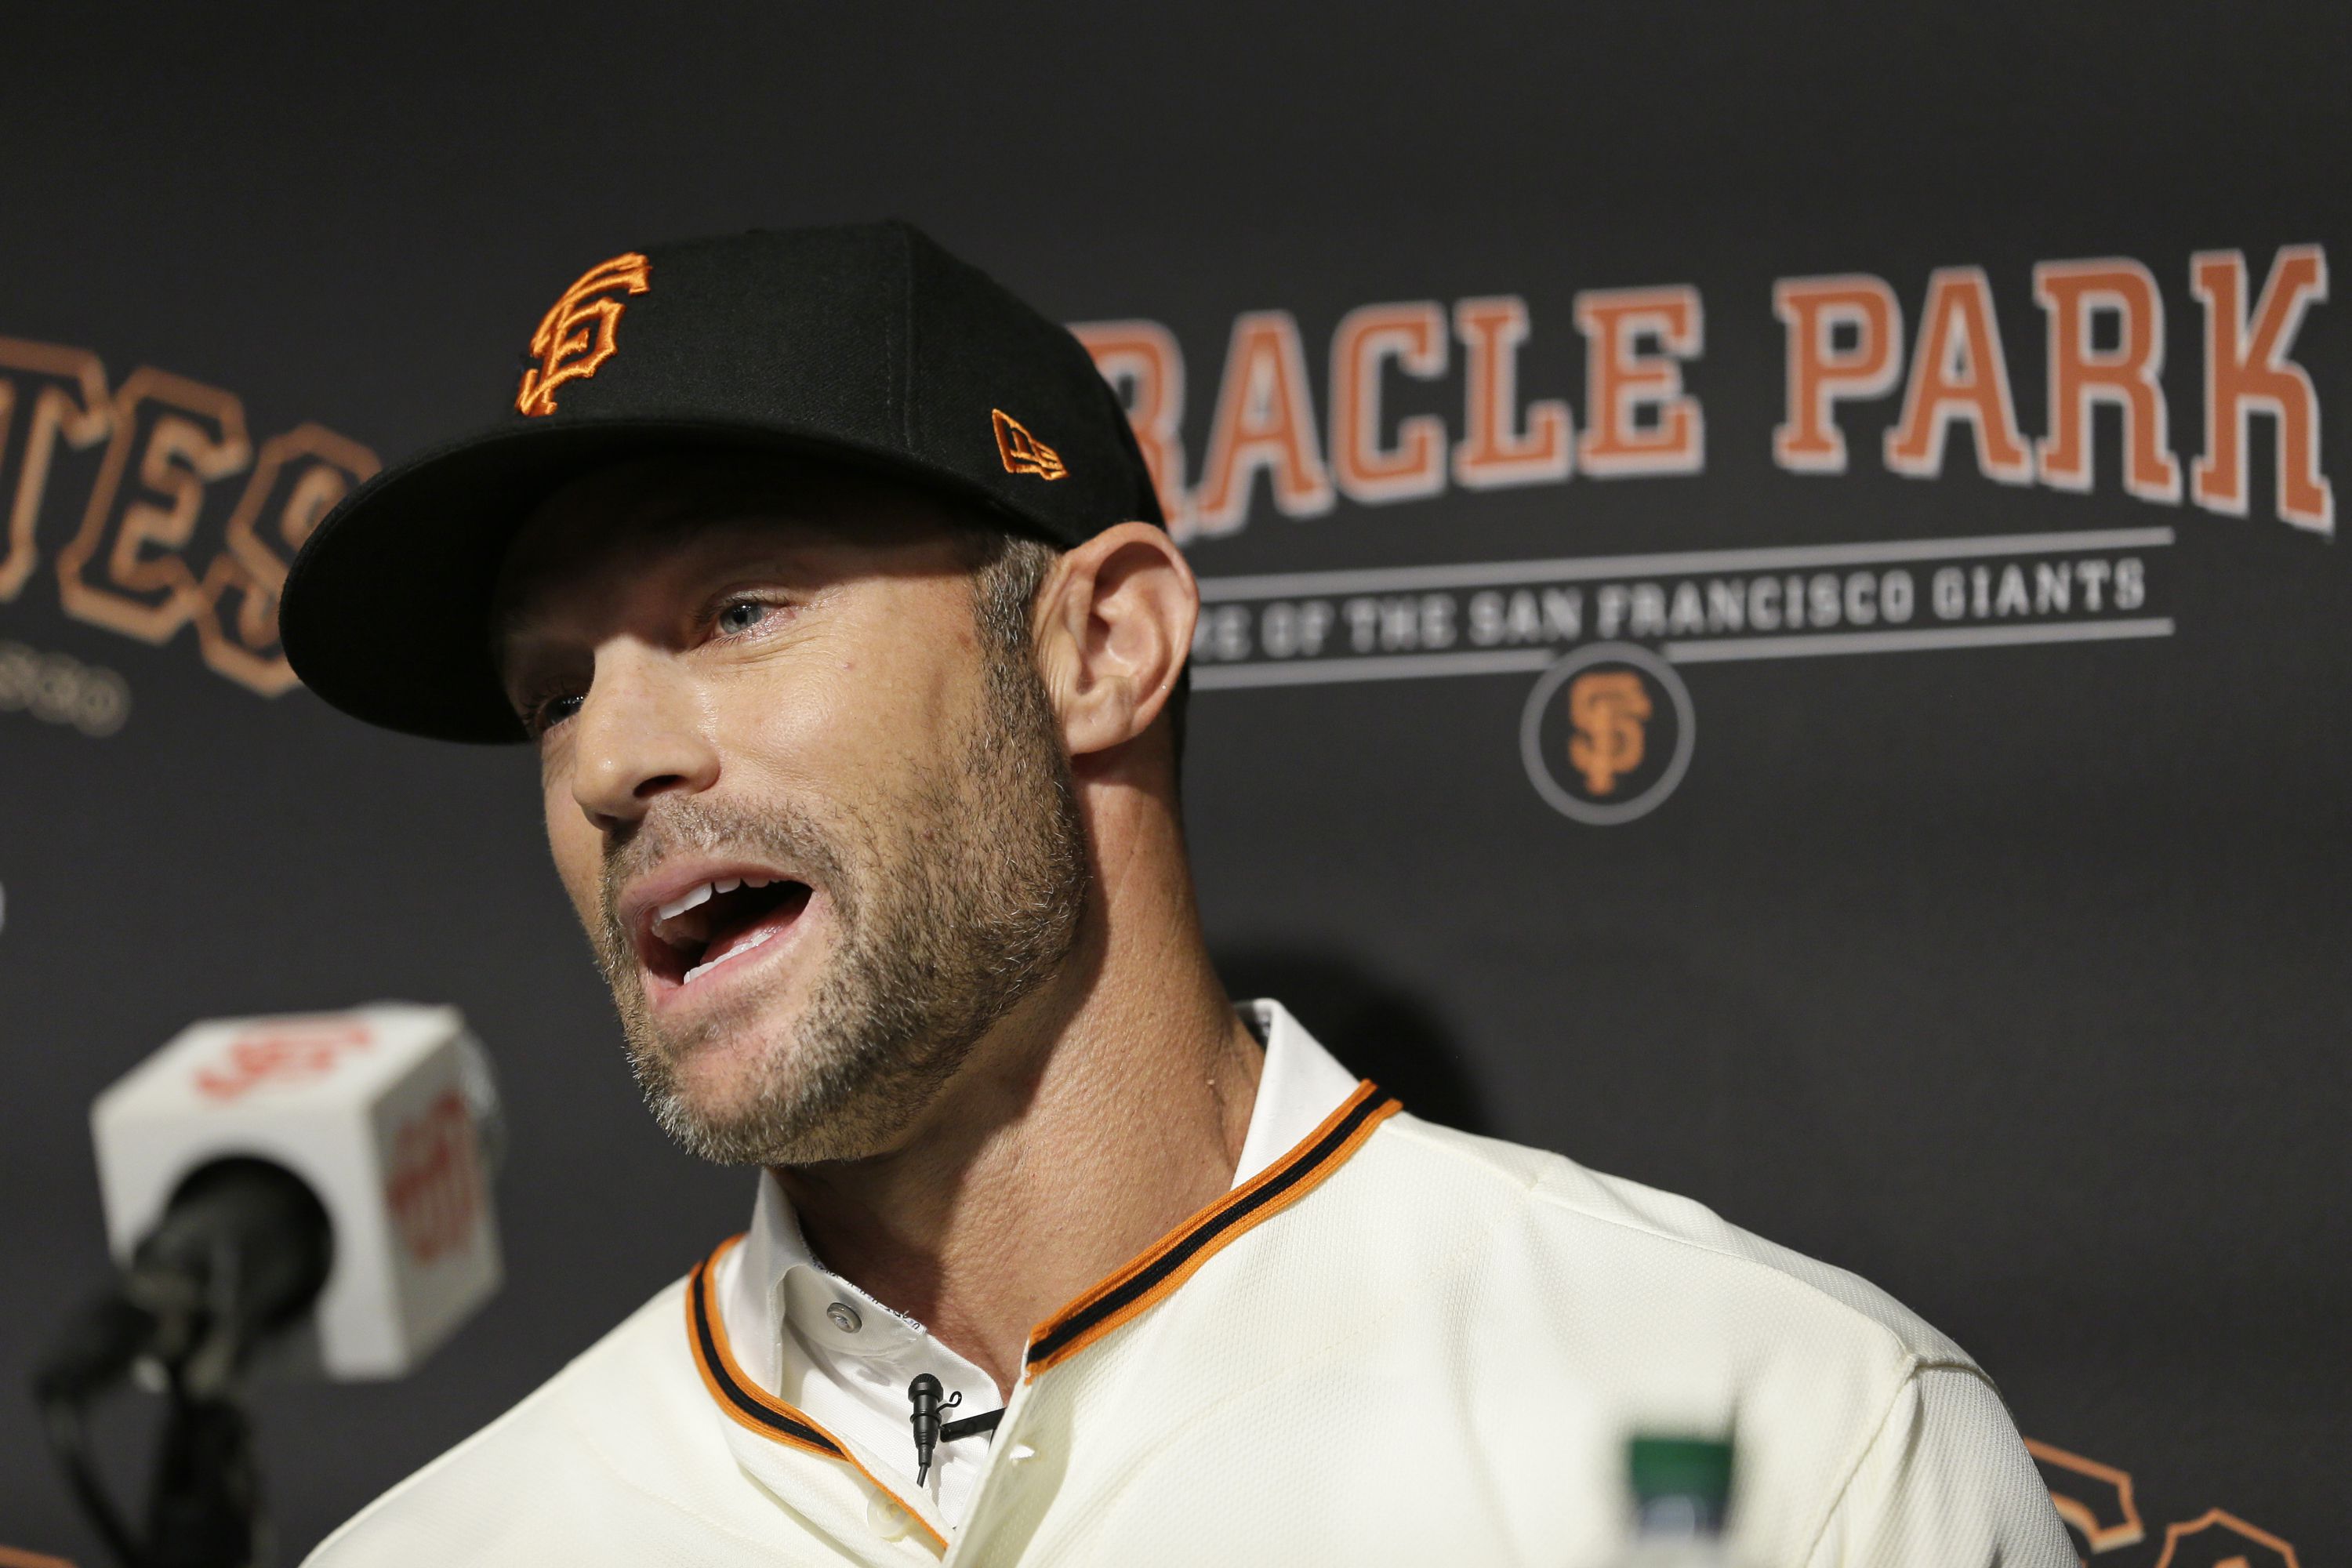 Giants manager Gabe Kapler suspended by MLB for unusual reason